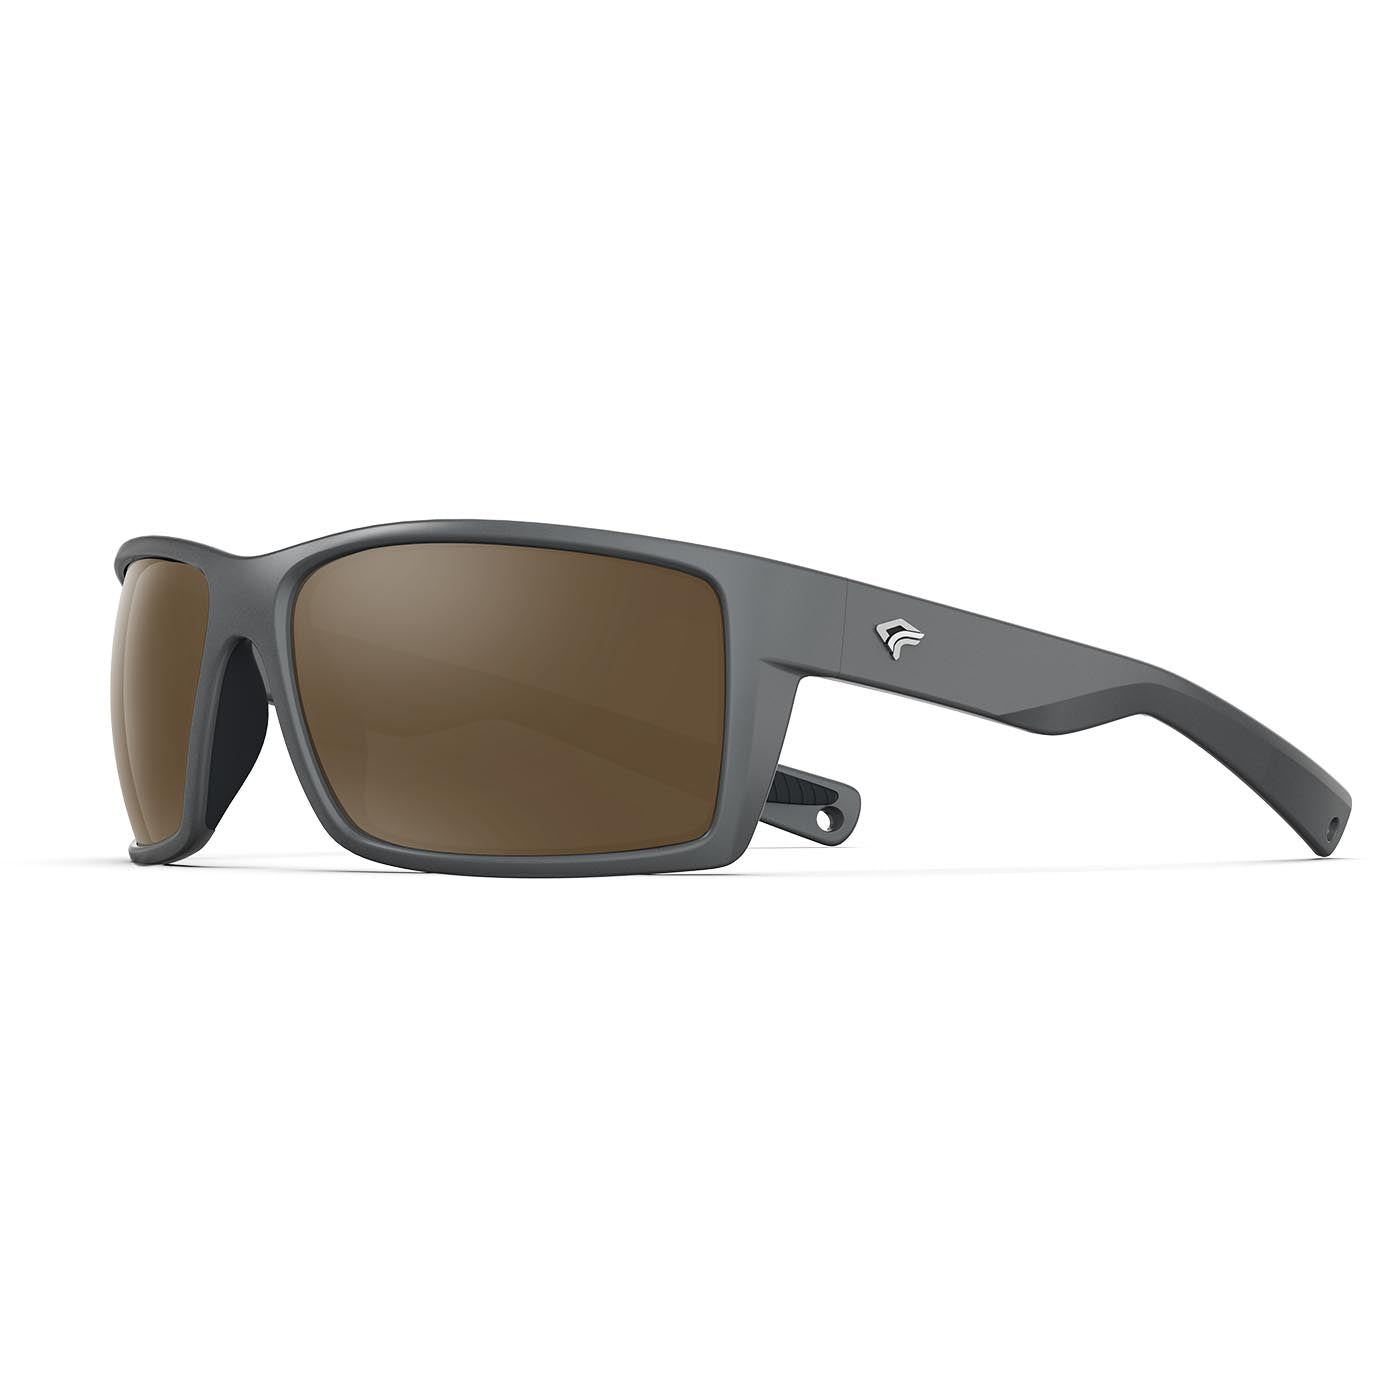 Chameleon Polarized Sports Sunglasses for Men and Women With